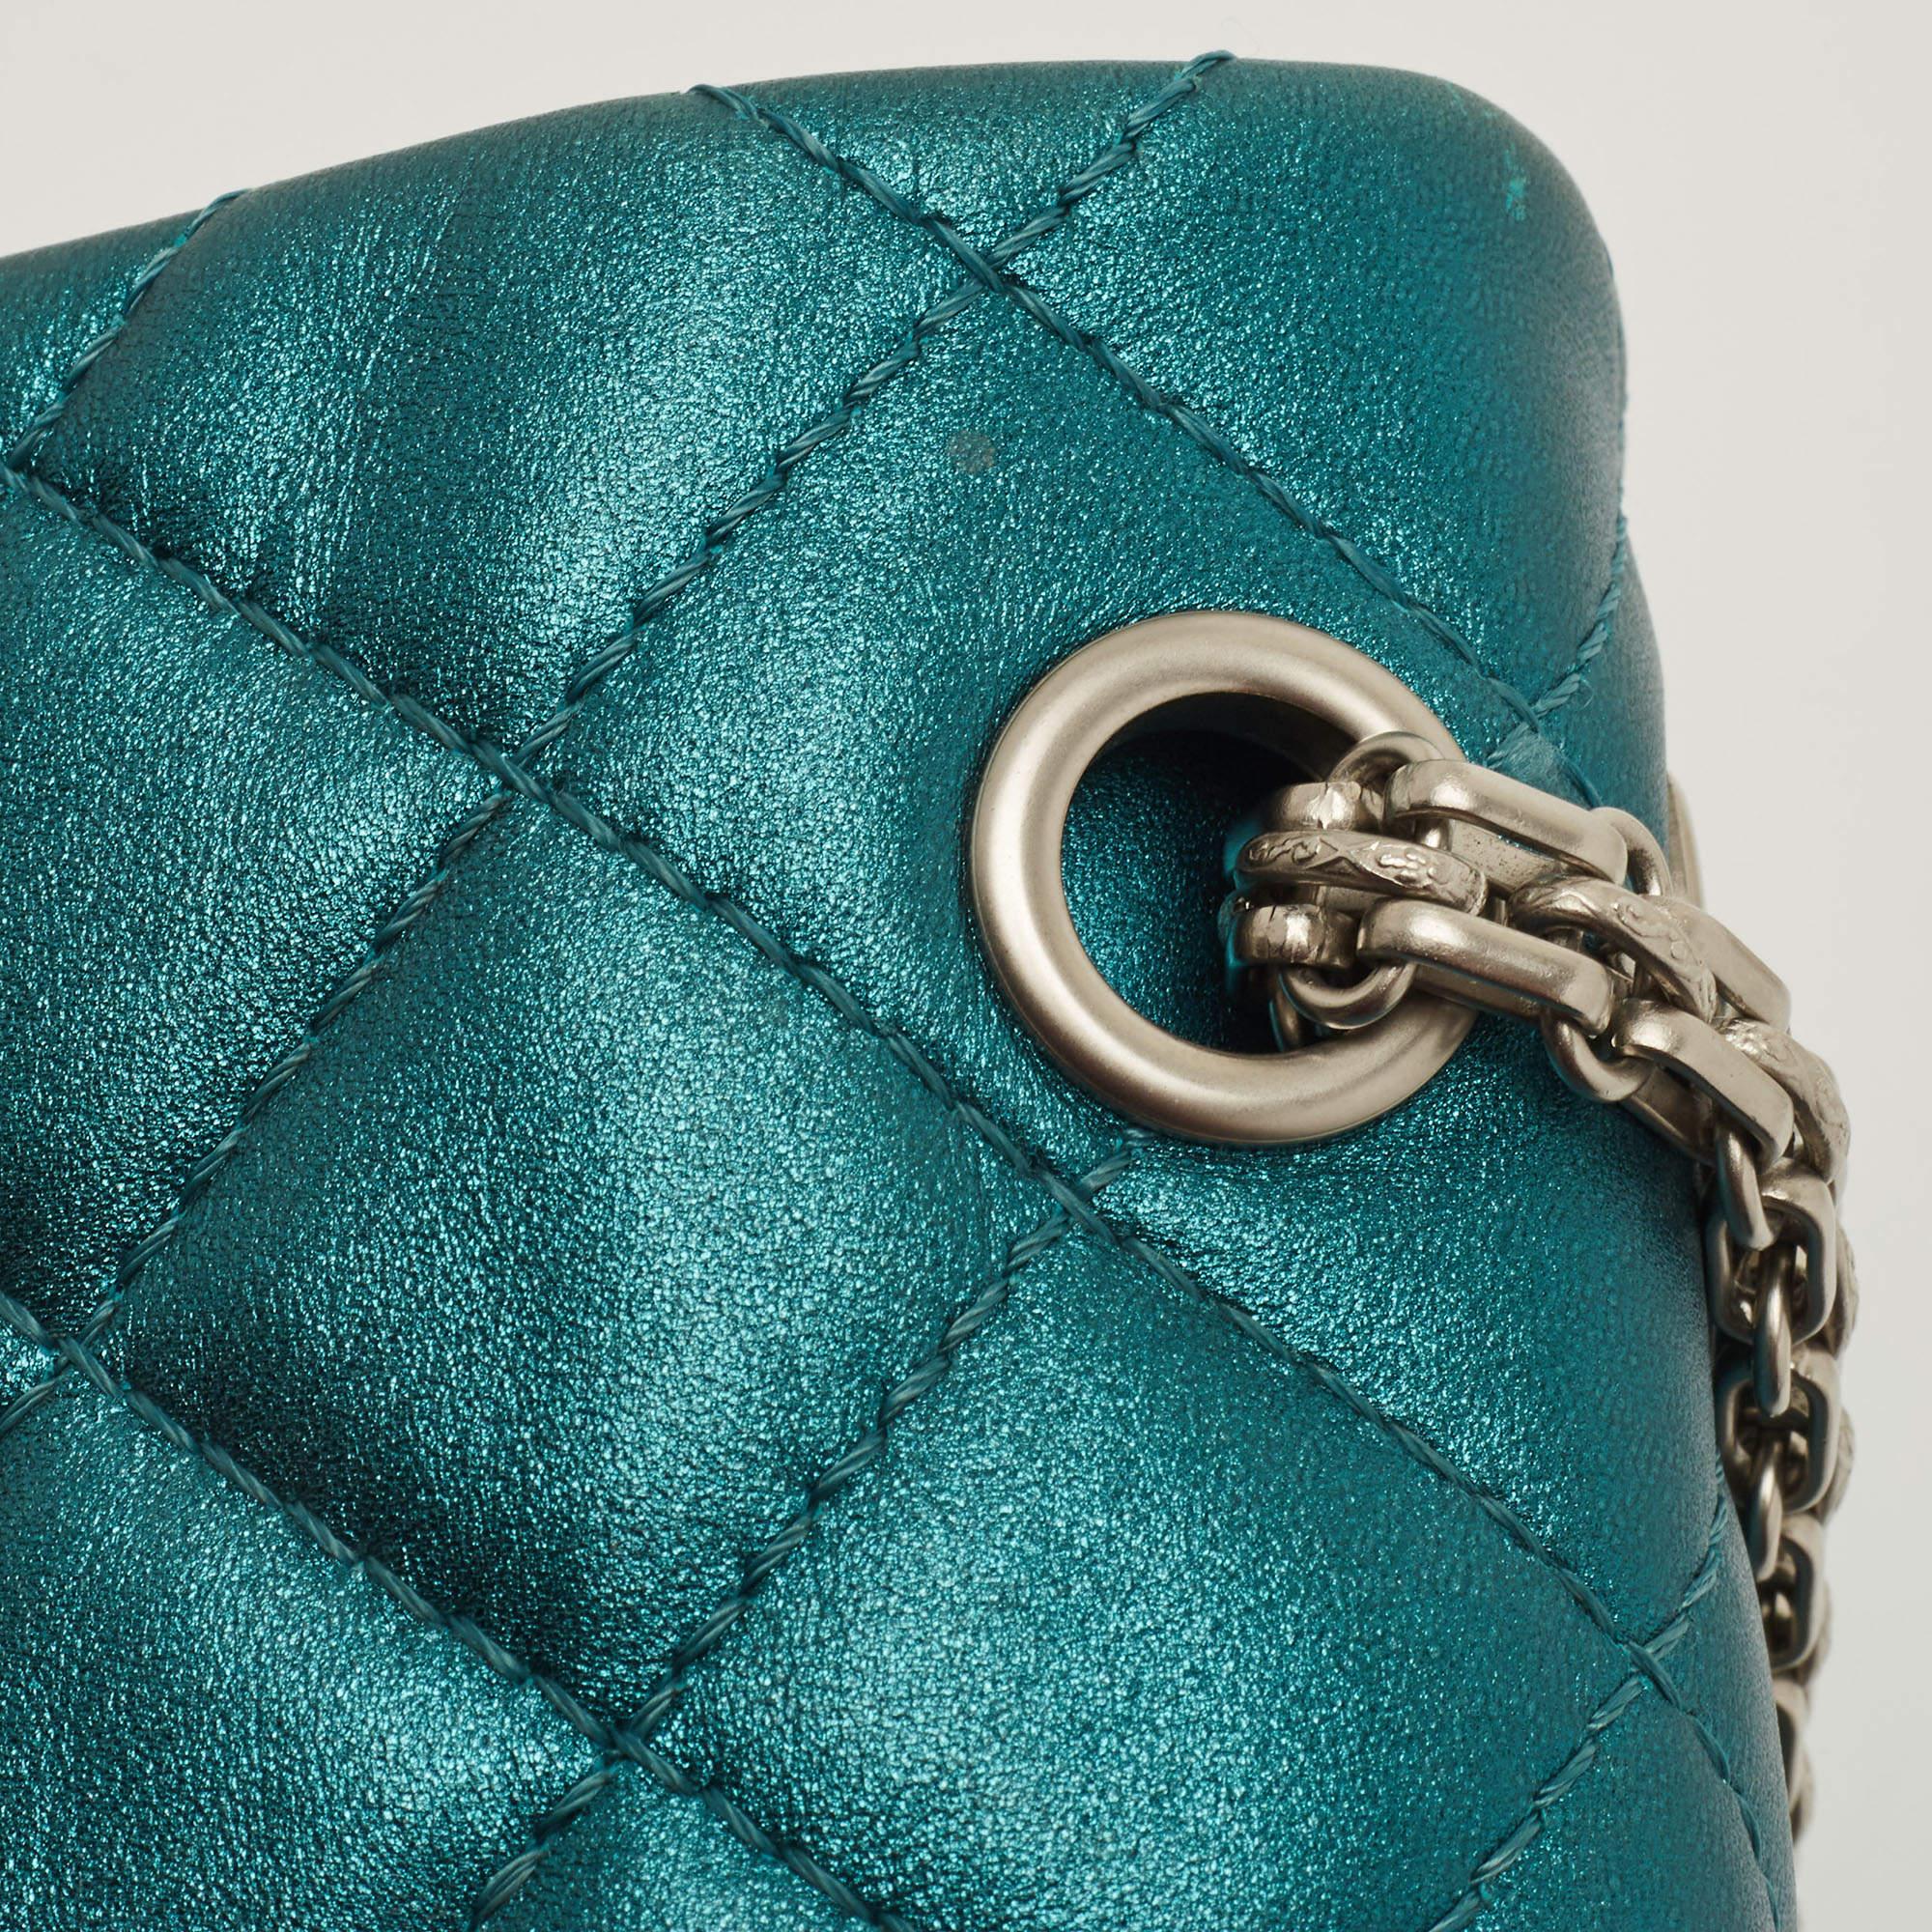 Chanel Metallic Teal Green Quilted Leather Reissue 2.55 Classic 226 Flap Bag en vente 5